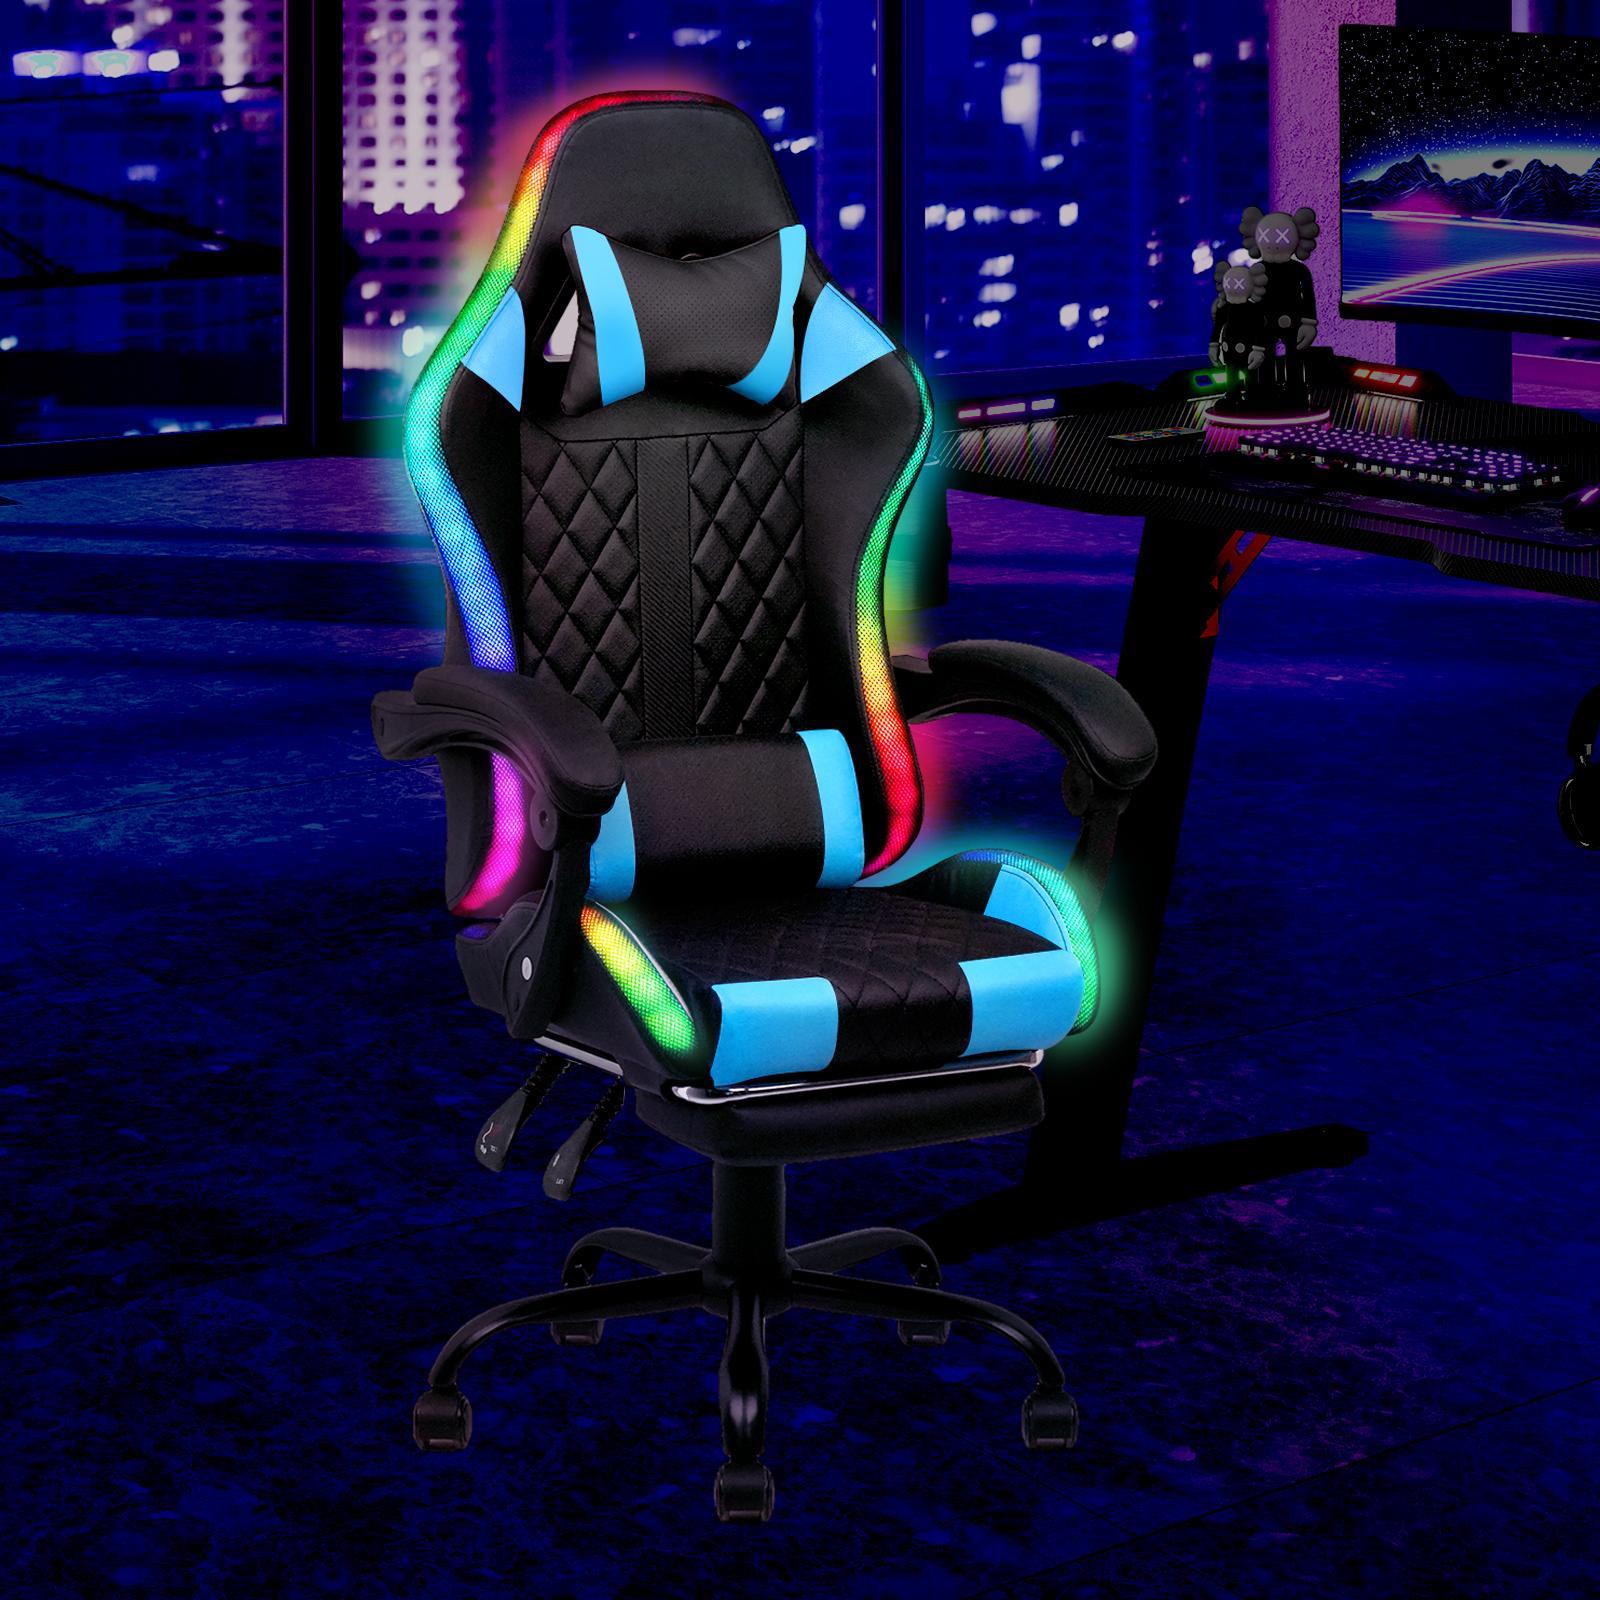 Advwin Gaming Chair with 12 RGB LED Lights w/ Footrest Black & Blue